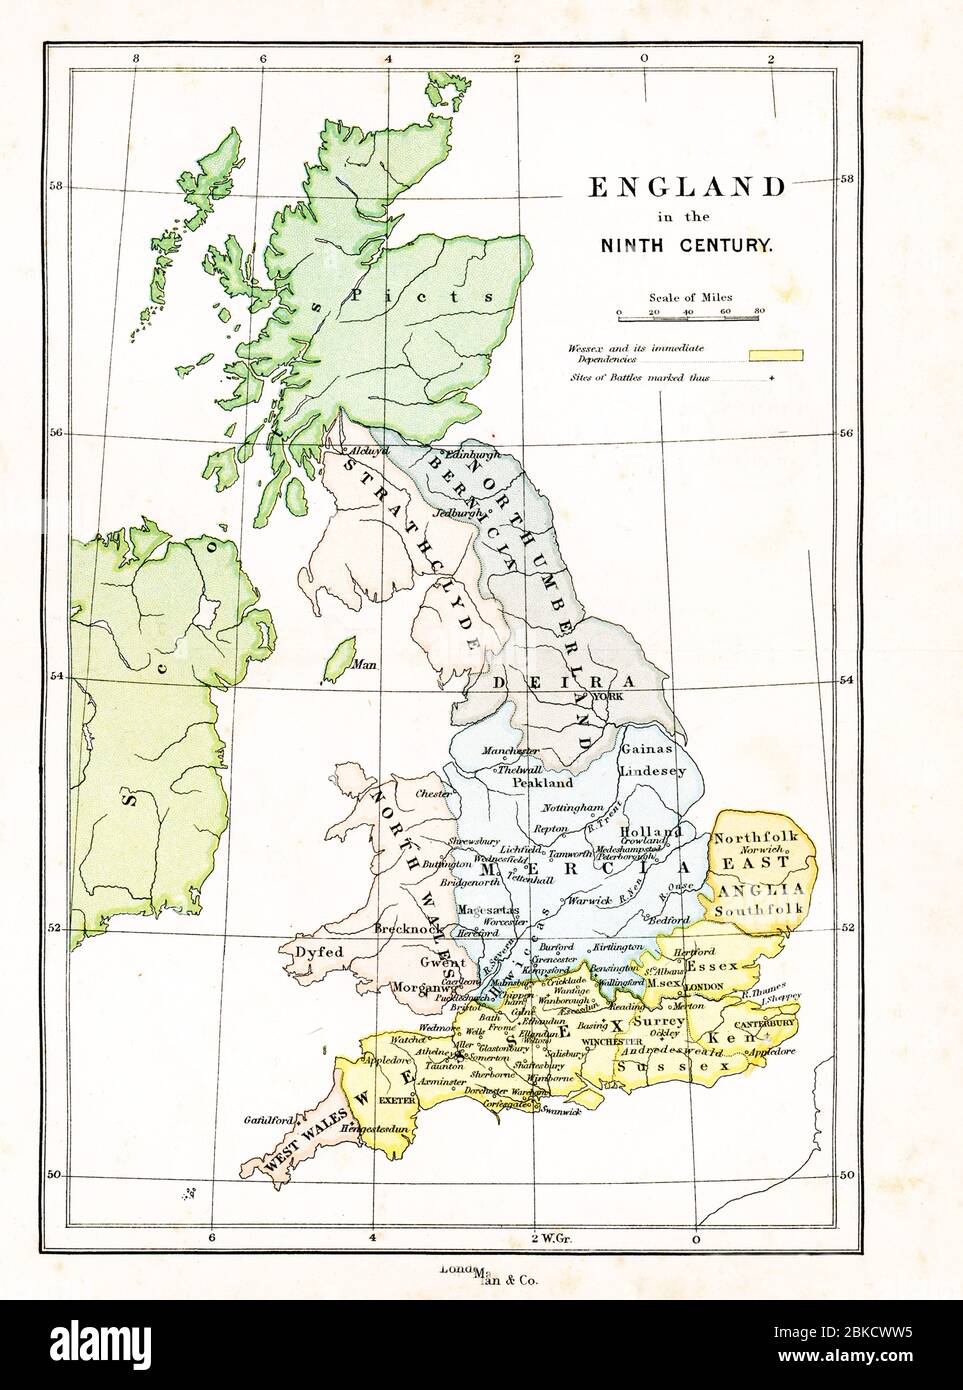 This map shows Britain in the 9th century A.D. The legend has yellow as representing Wessex and its immediate dependencies. A plus-sign marks the site of battles. Stock Photo